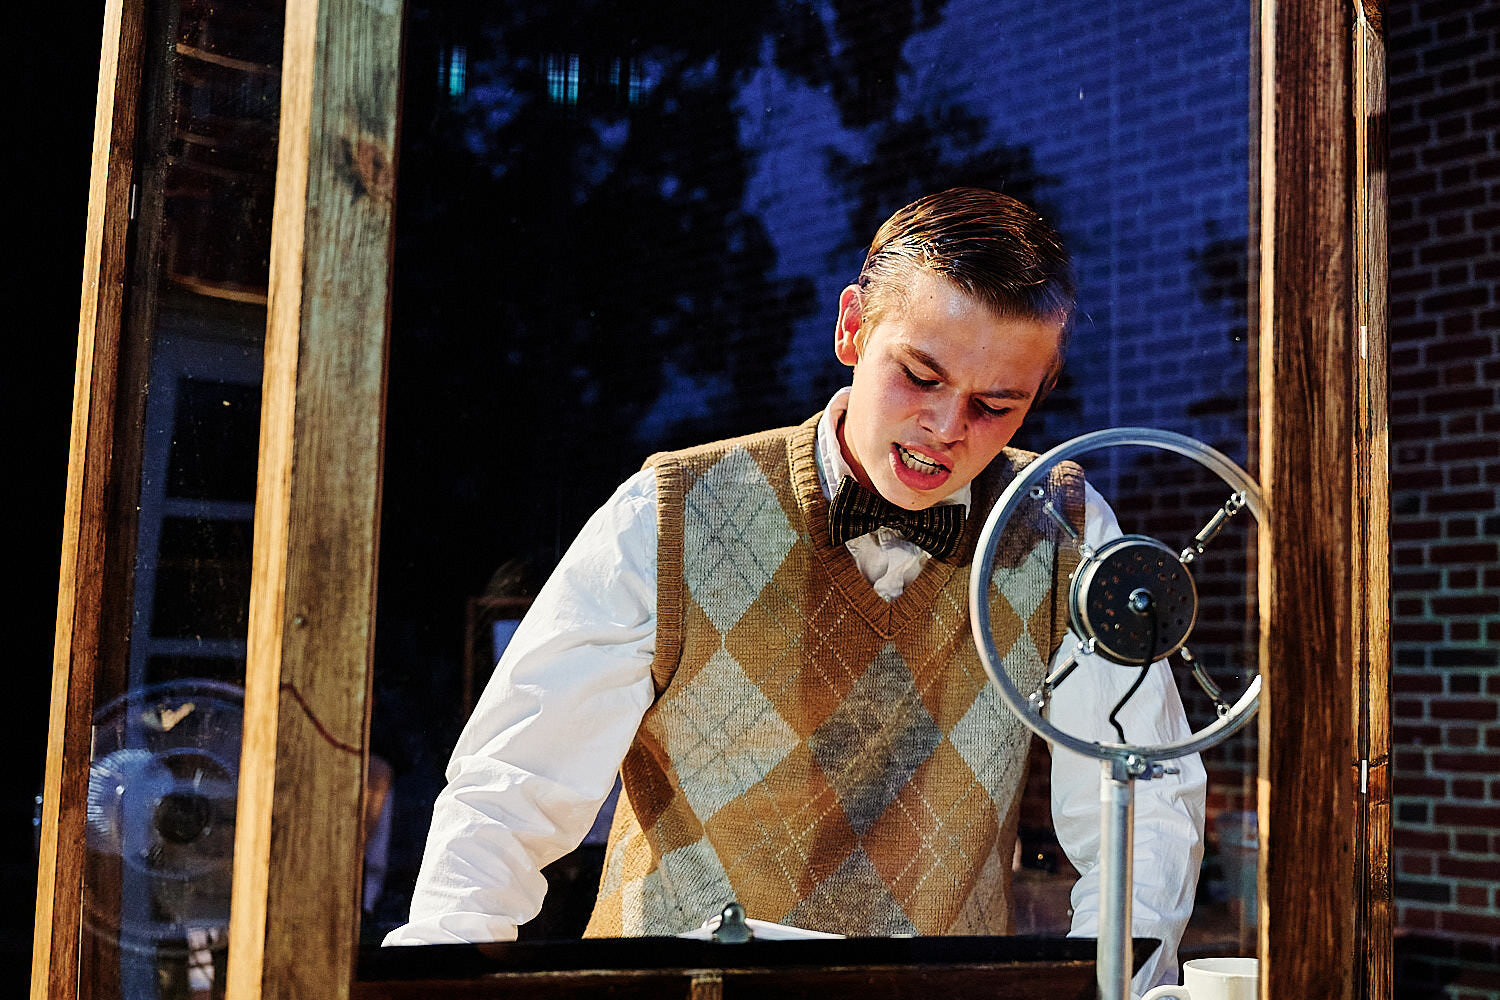  Max Peluso of Sewickley Academy high school engaged in a theater play War of the Worlds by H. G. Wells. The show is outdoors with COVID-19 social distancing and mask-wearing. 